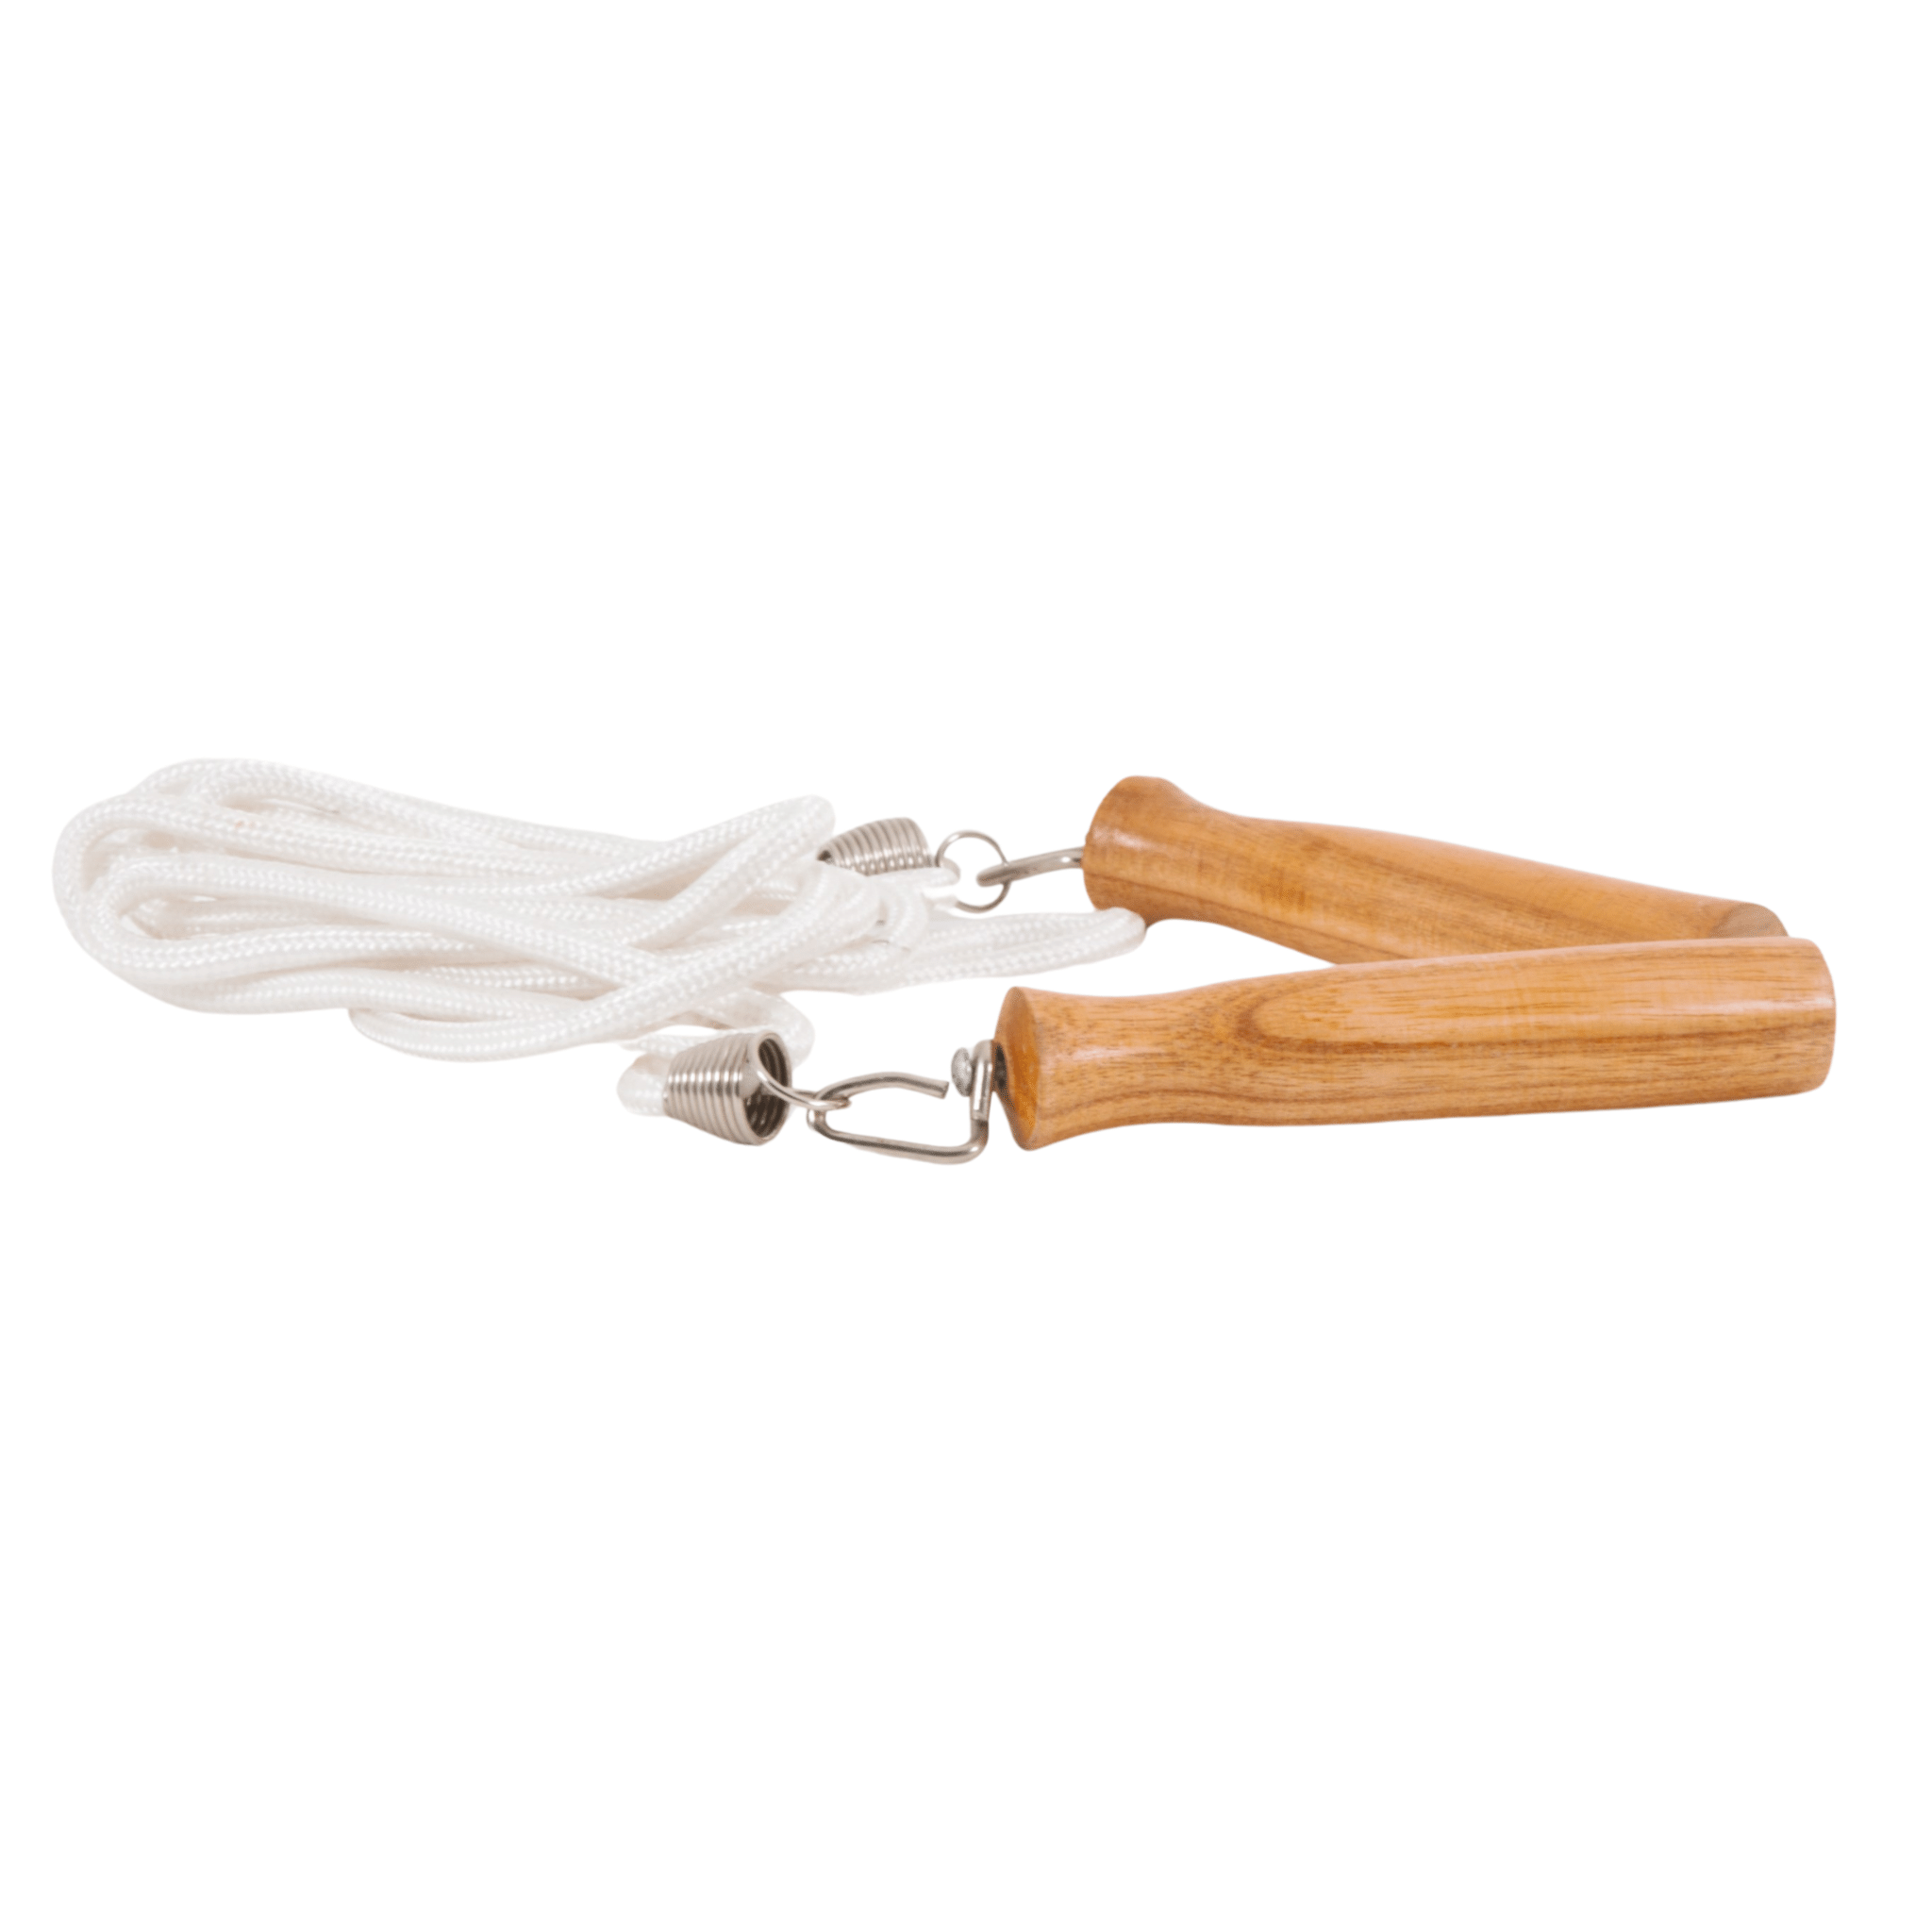 Cotton skipping rope with handle